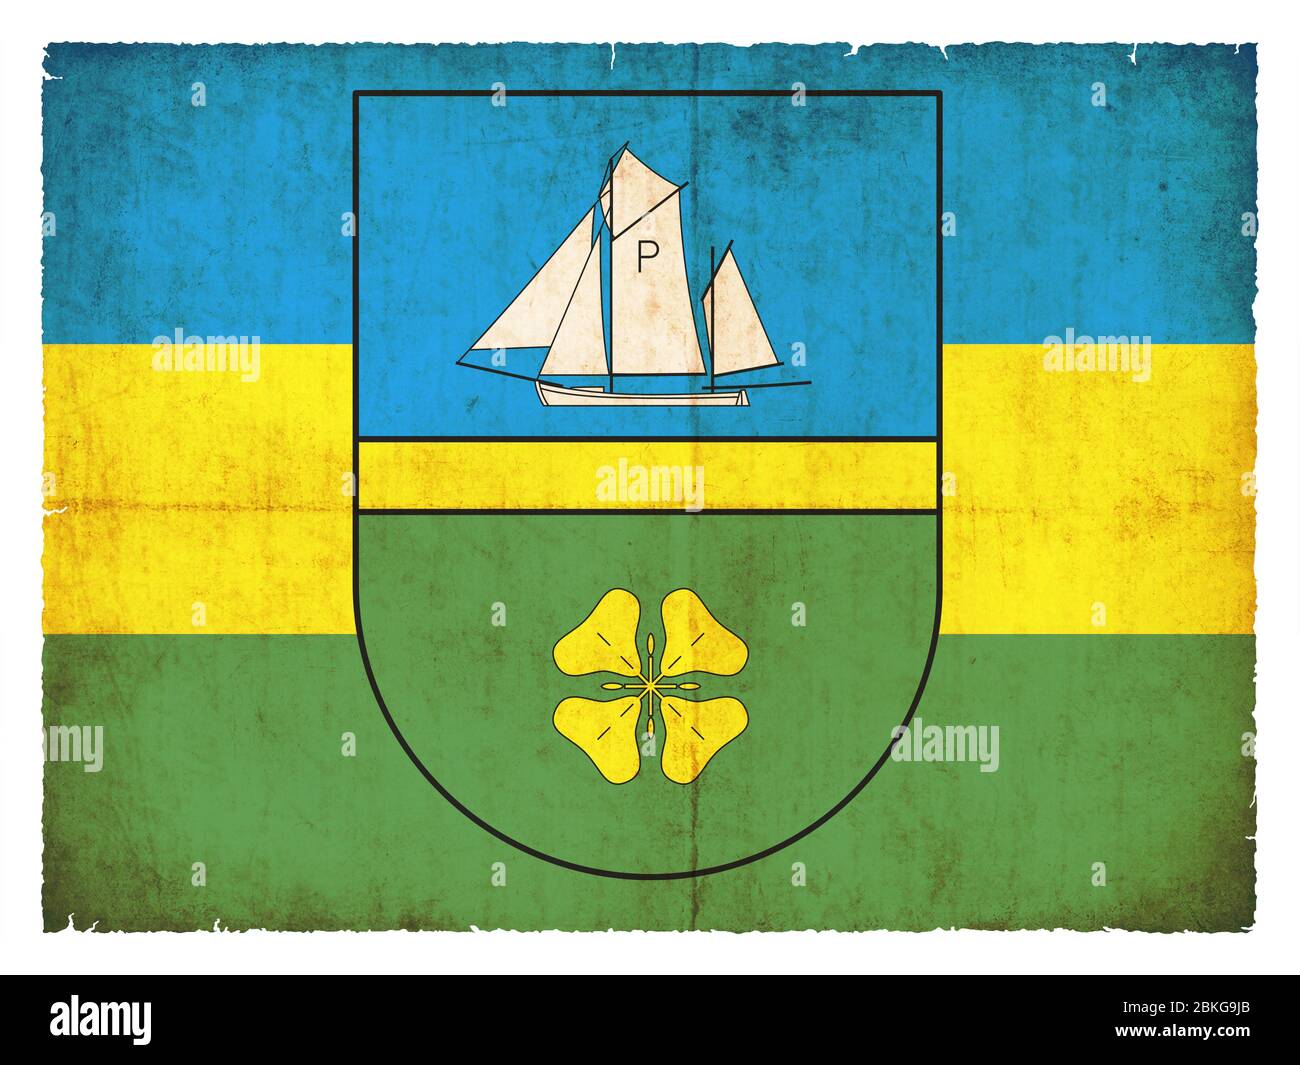 Flag of the German island Poel (Mecklenburg-Vorpommern, Germany) created in grunge style Stock Photo